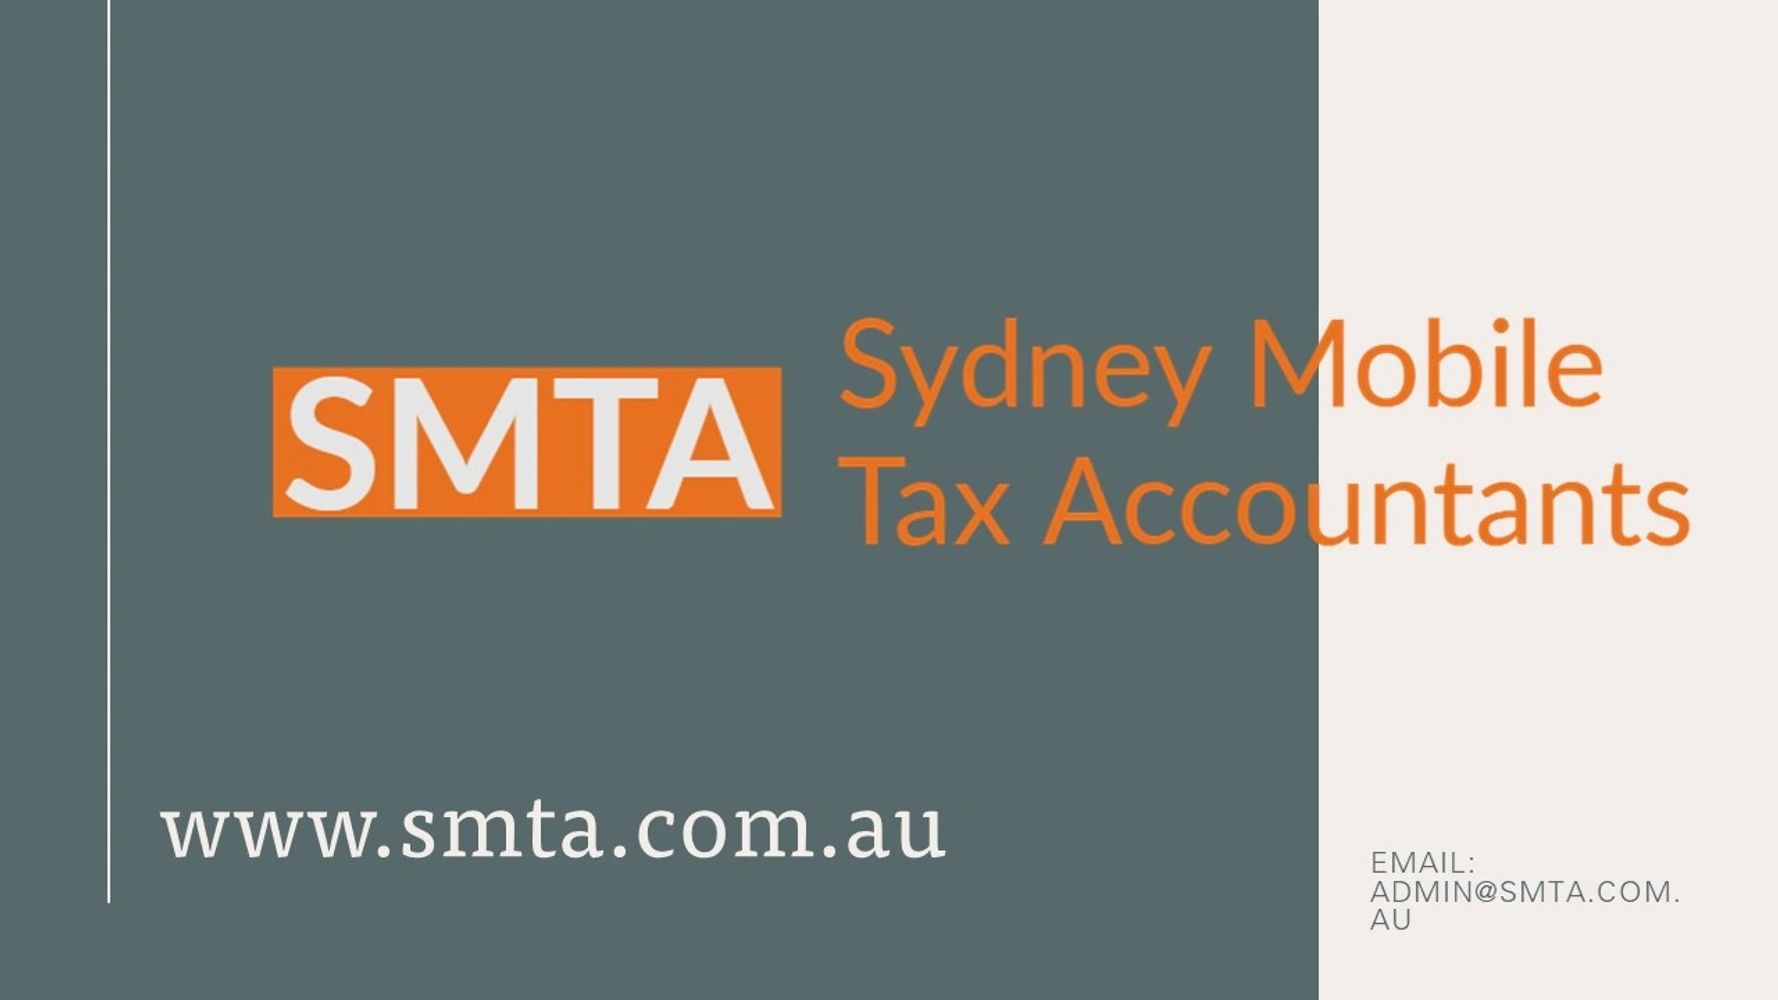 Sydney Mobile Tax Accountants
SMTA - Tax Agents to your door